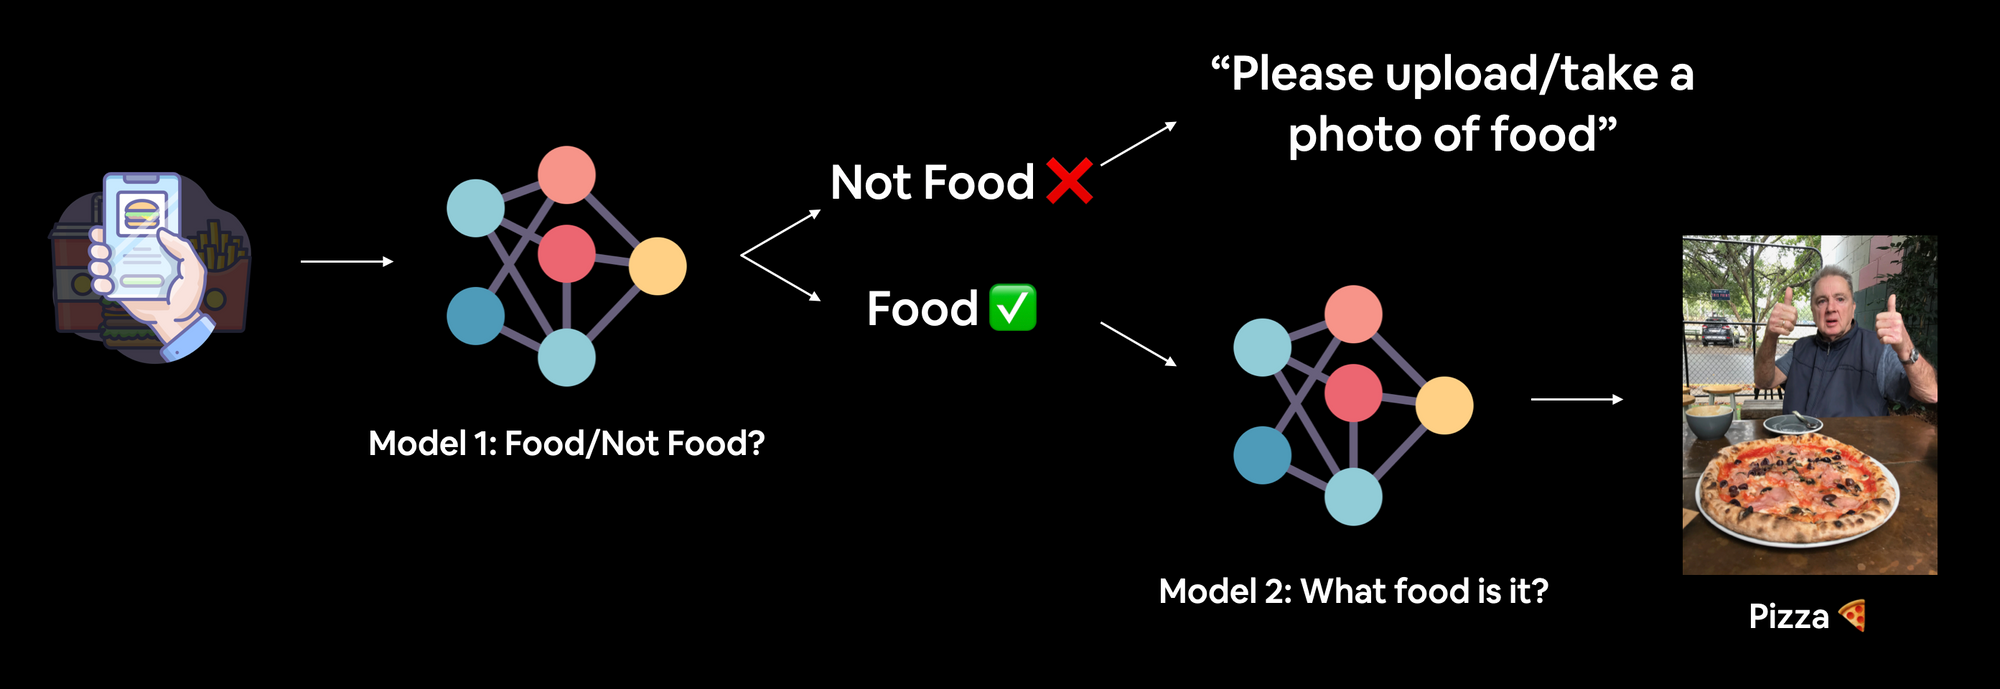 Nutrify's workflow: a photo of food goes through two models, food not food and then a model that detects what food is in the image